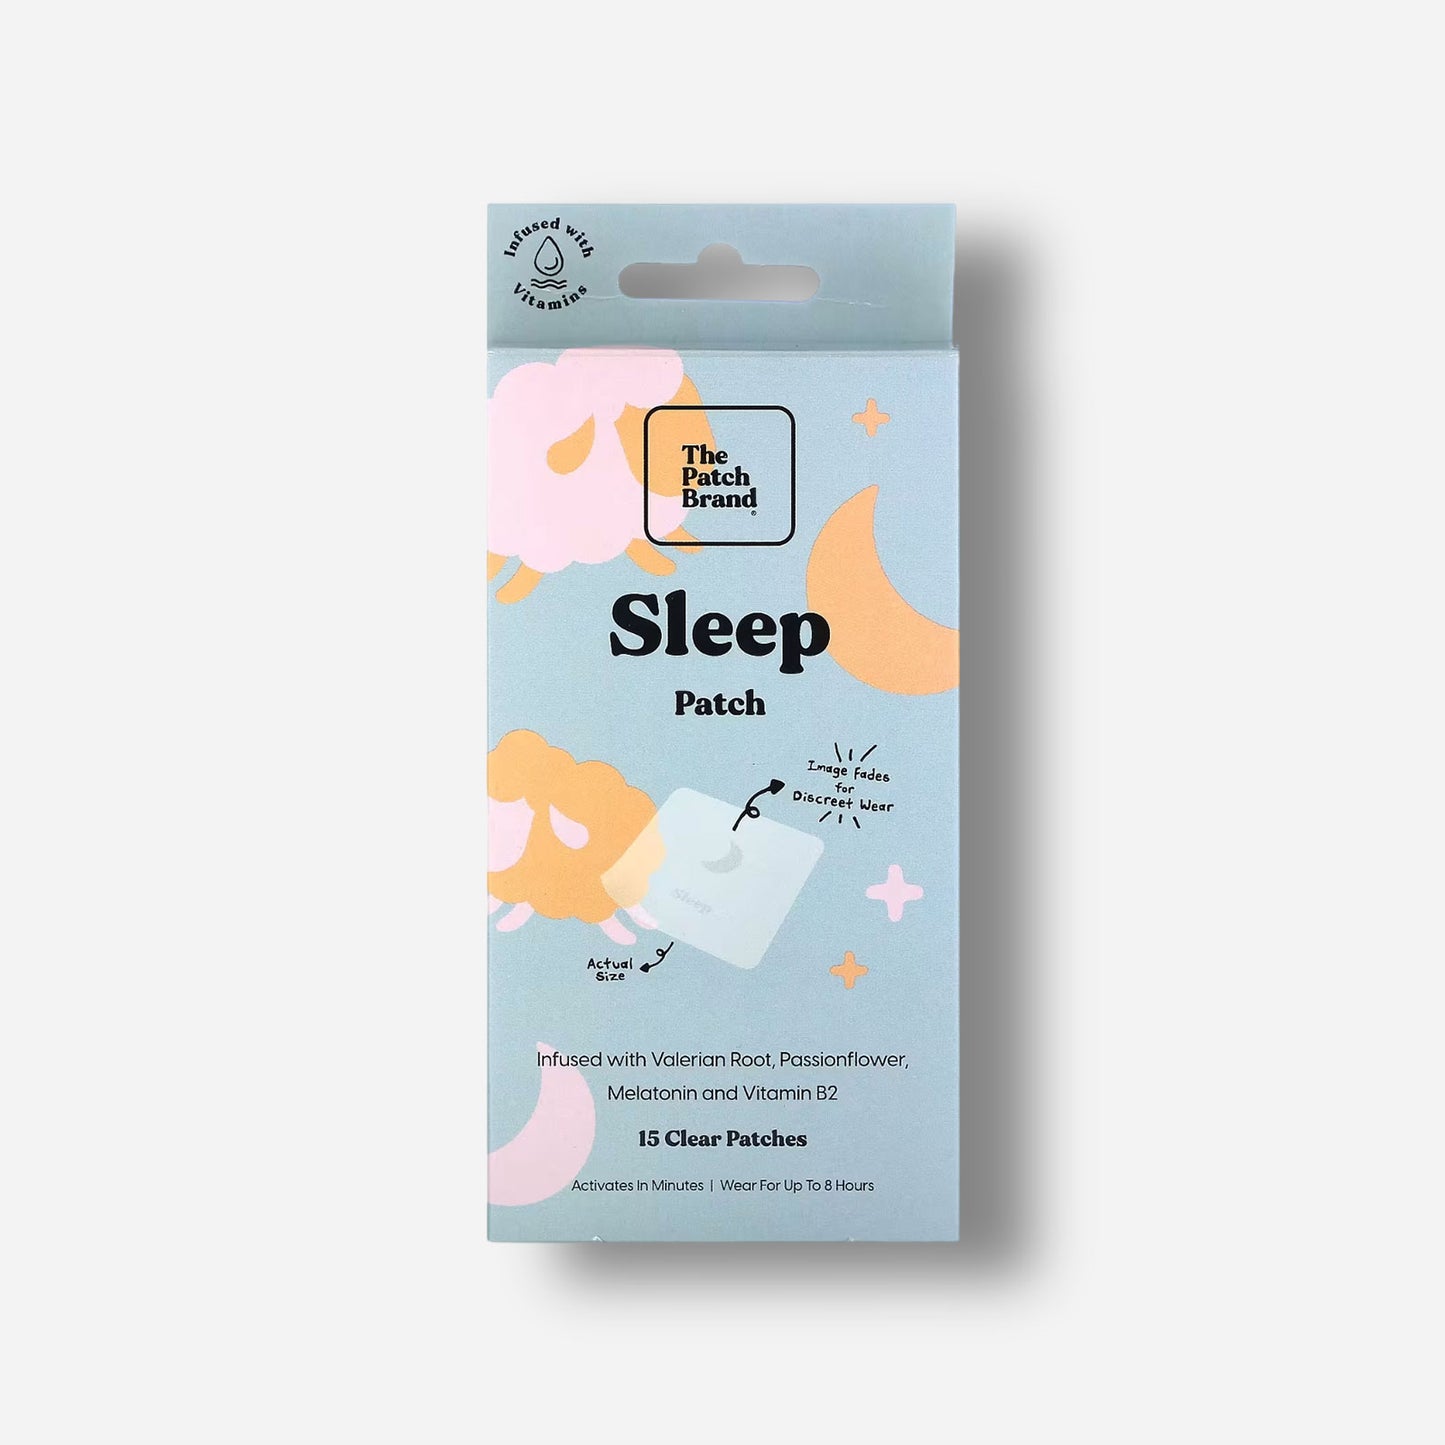 THE PATCH BRAND Sleep Patch